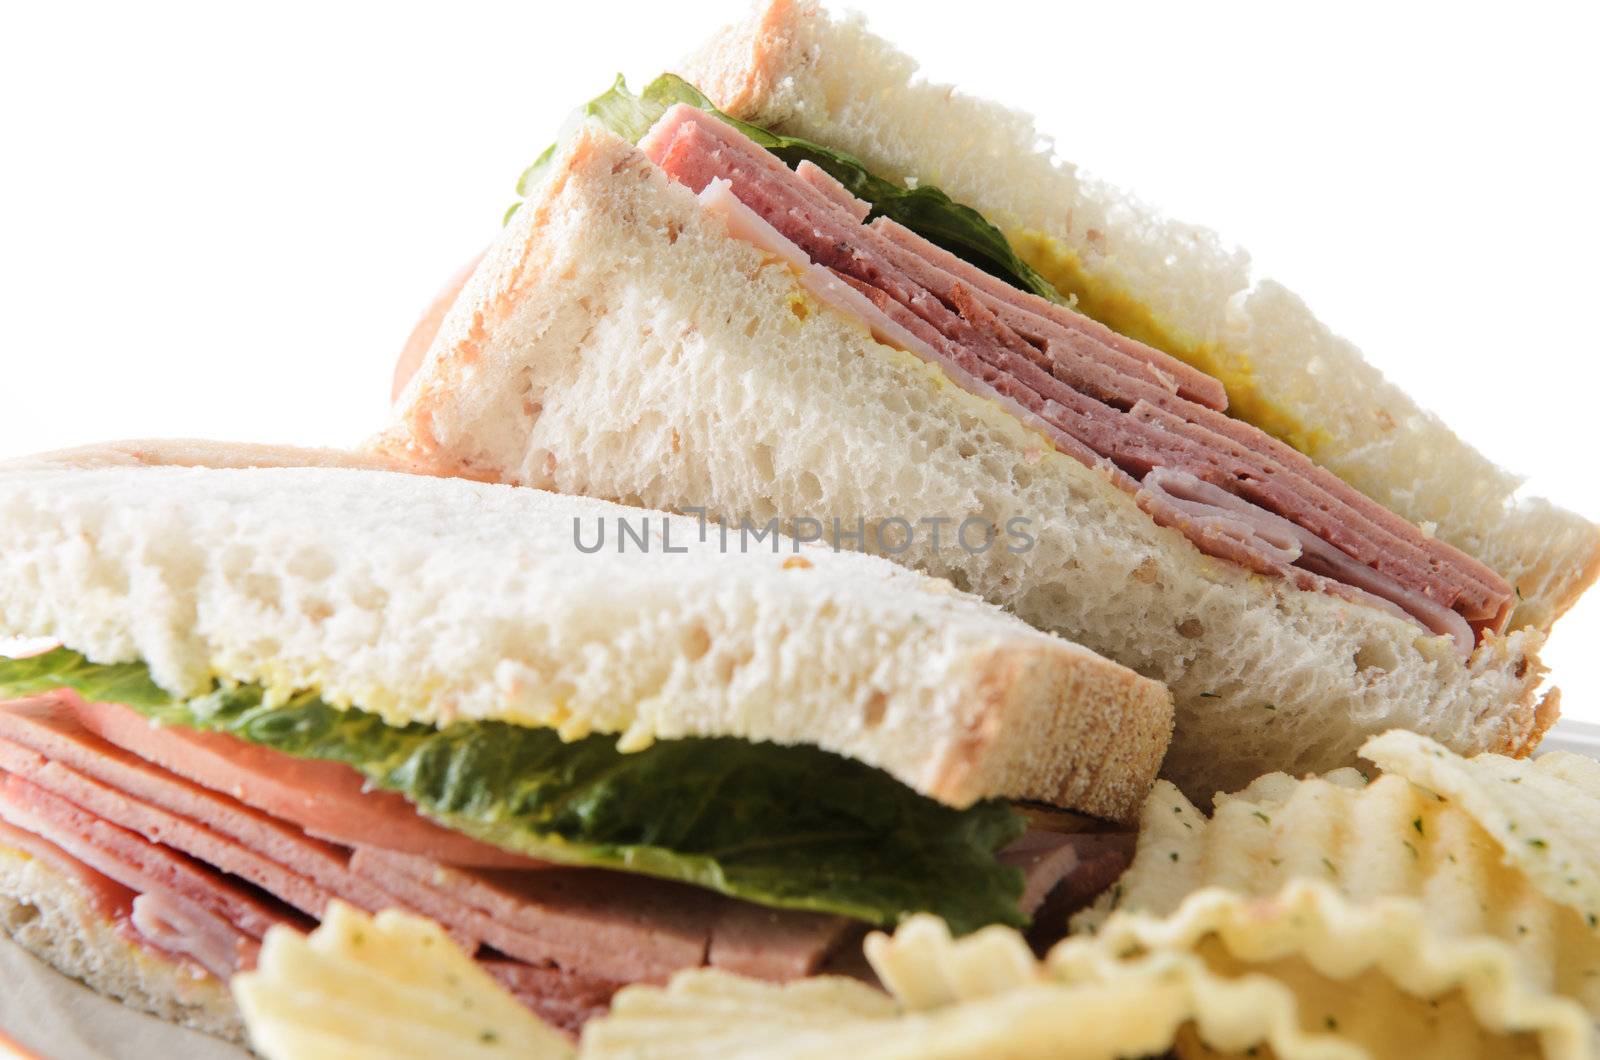 Closeup of a bologna sandwich with potato chips, isolated on a white background.